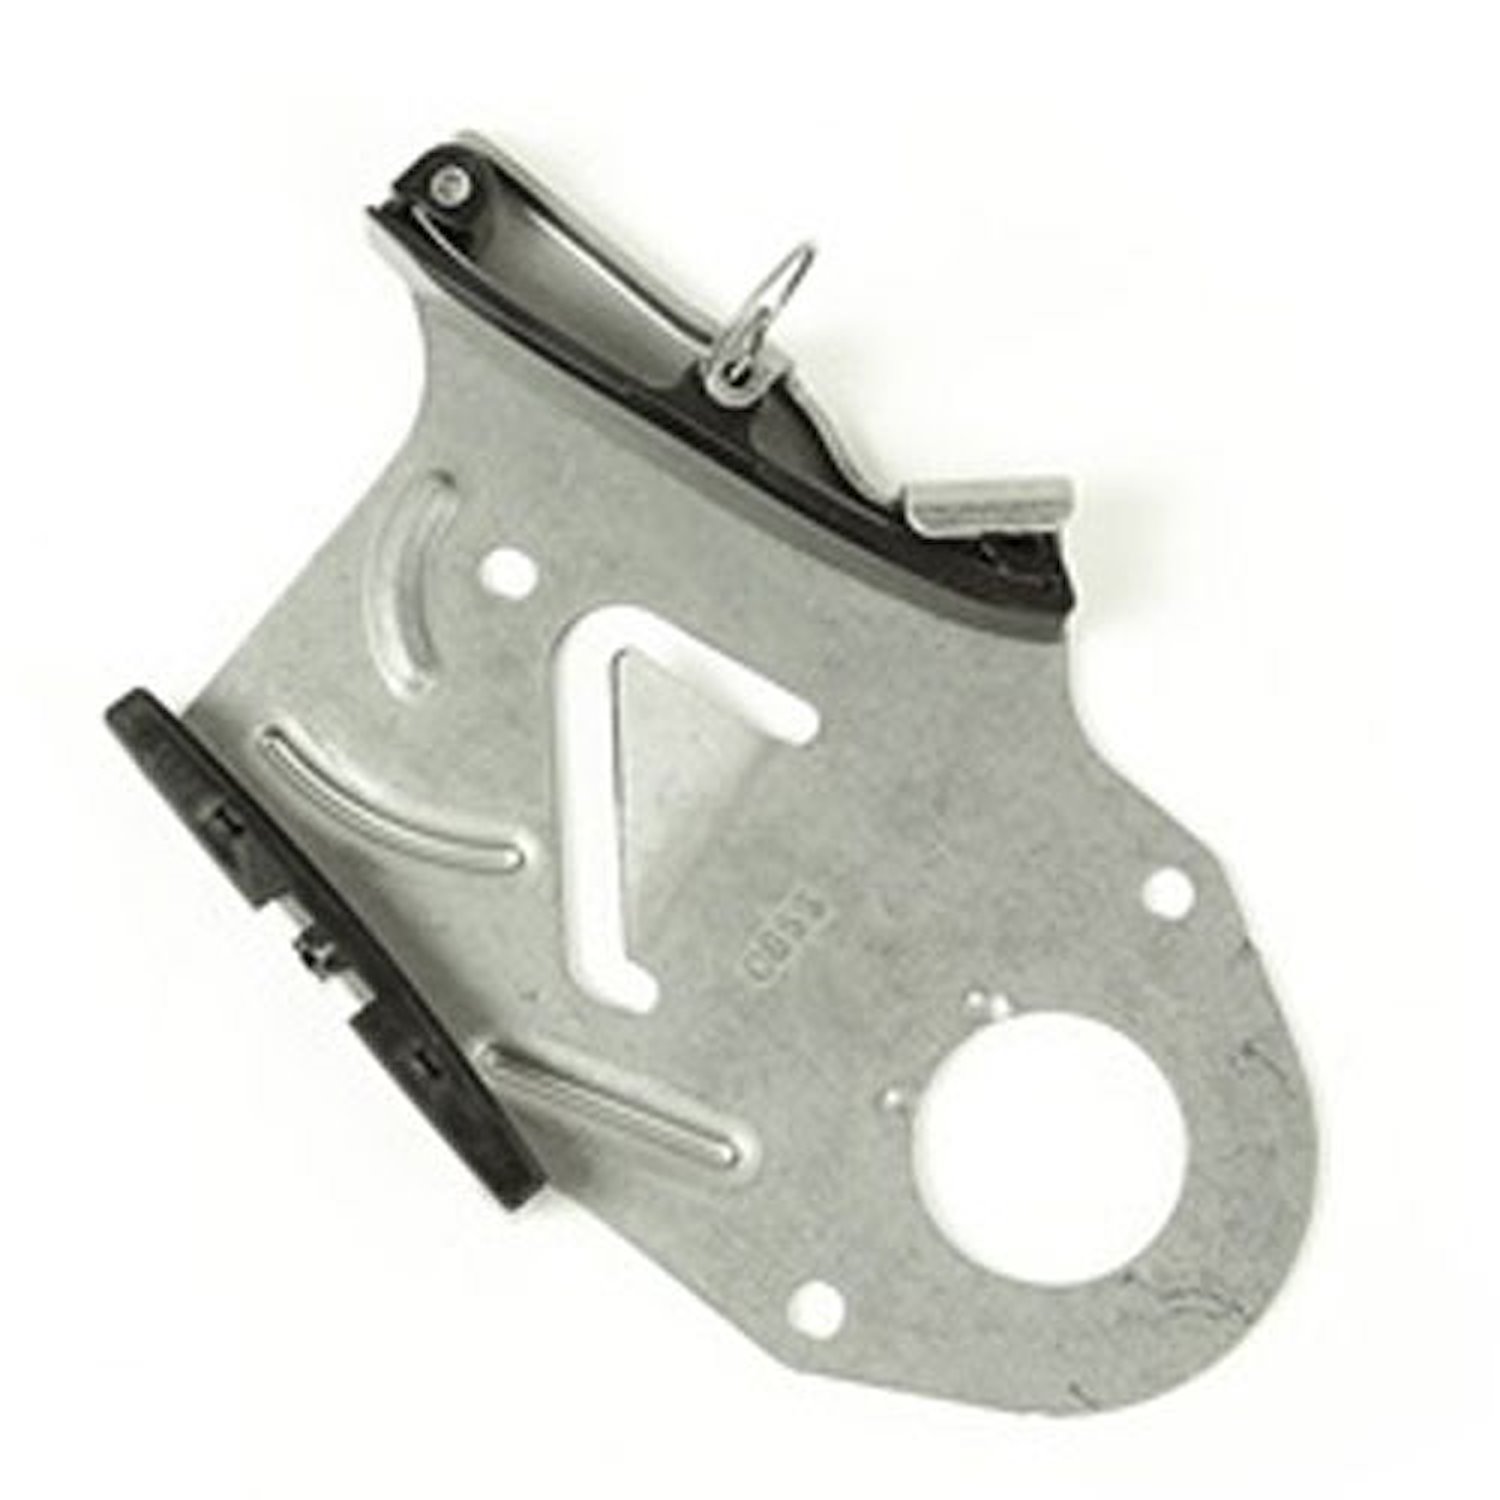 This timing chain tensioner from Omix-ADA fits 6.1L engines found in 06-10 Jeep Grand Cherokees.